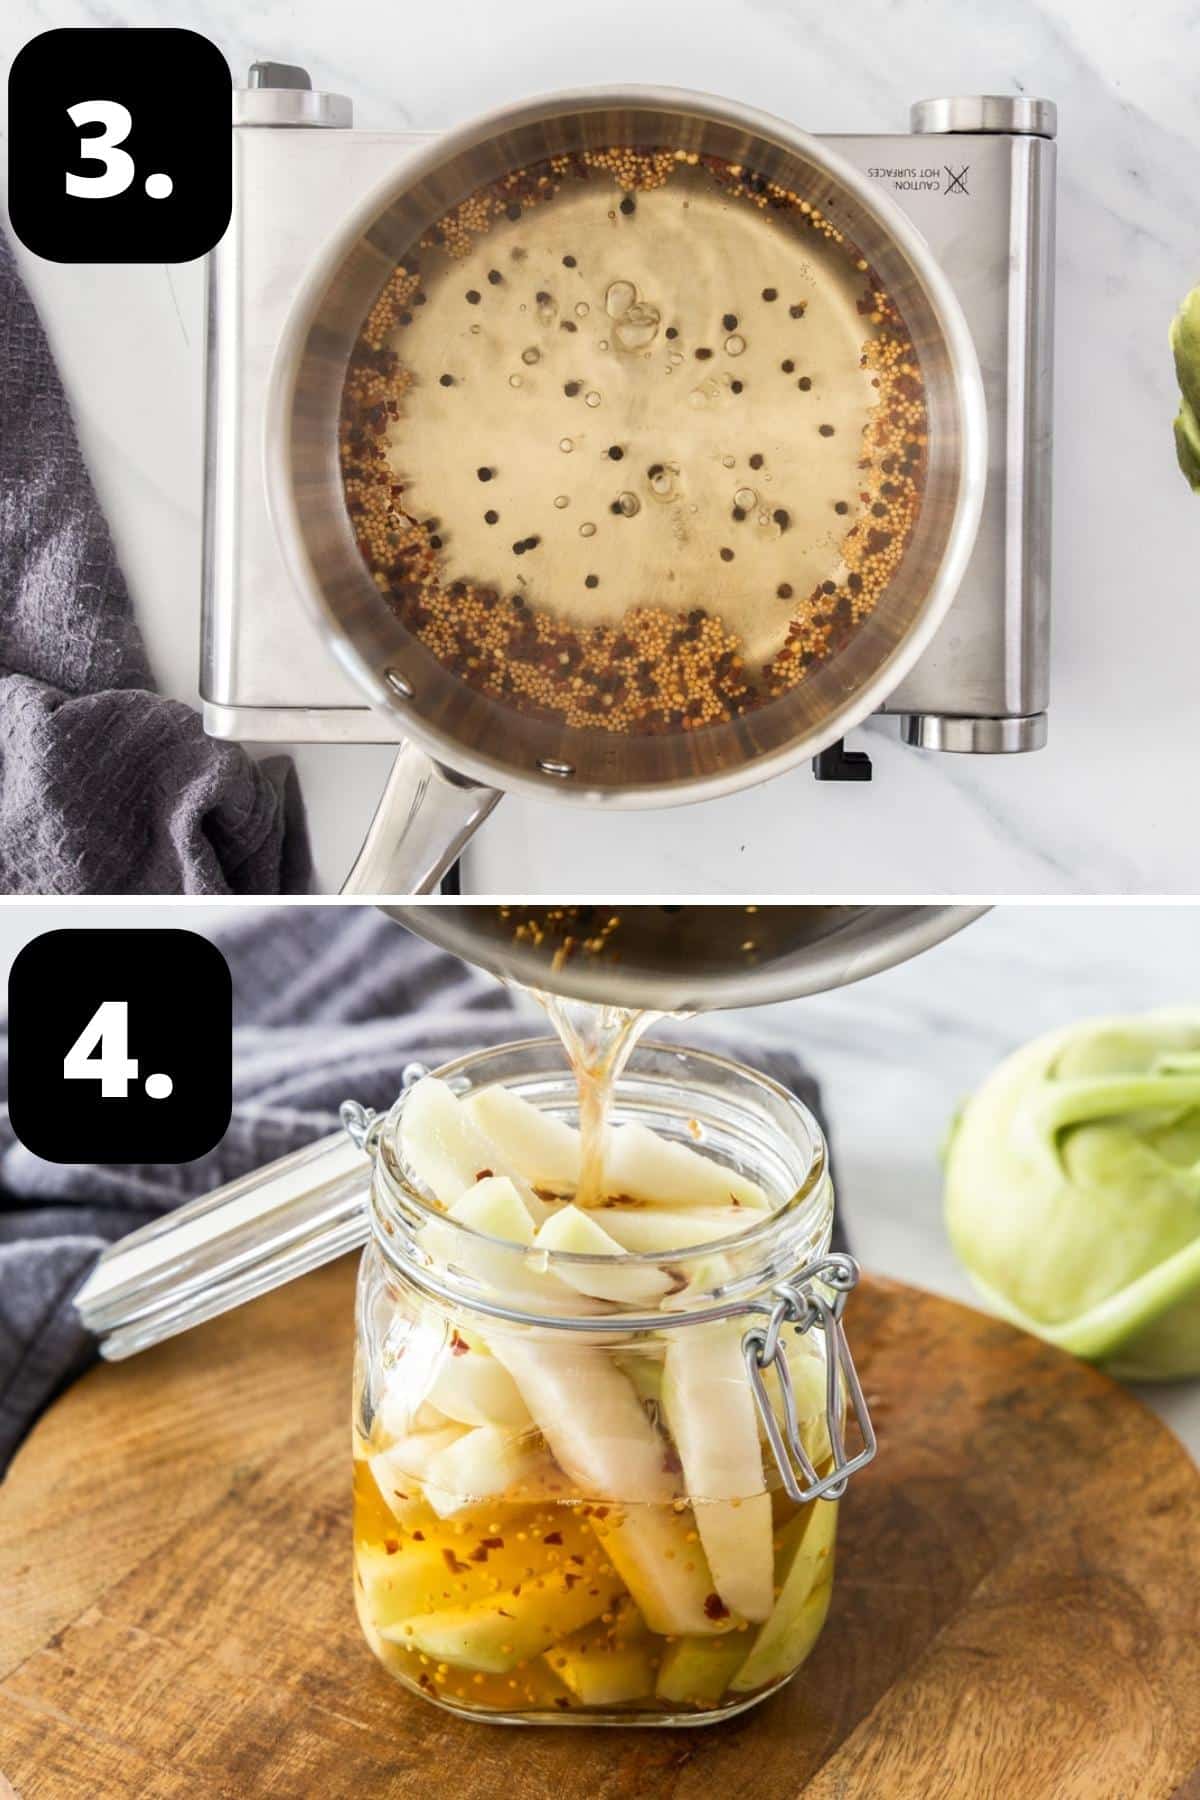 Steps 3-4 of preparing this recipe - the pickling liquid in a saucepan and adding the liquid to the jar of kohlrabi pieces.